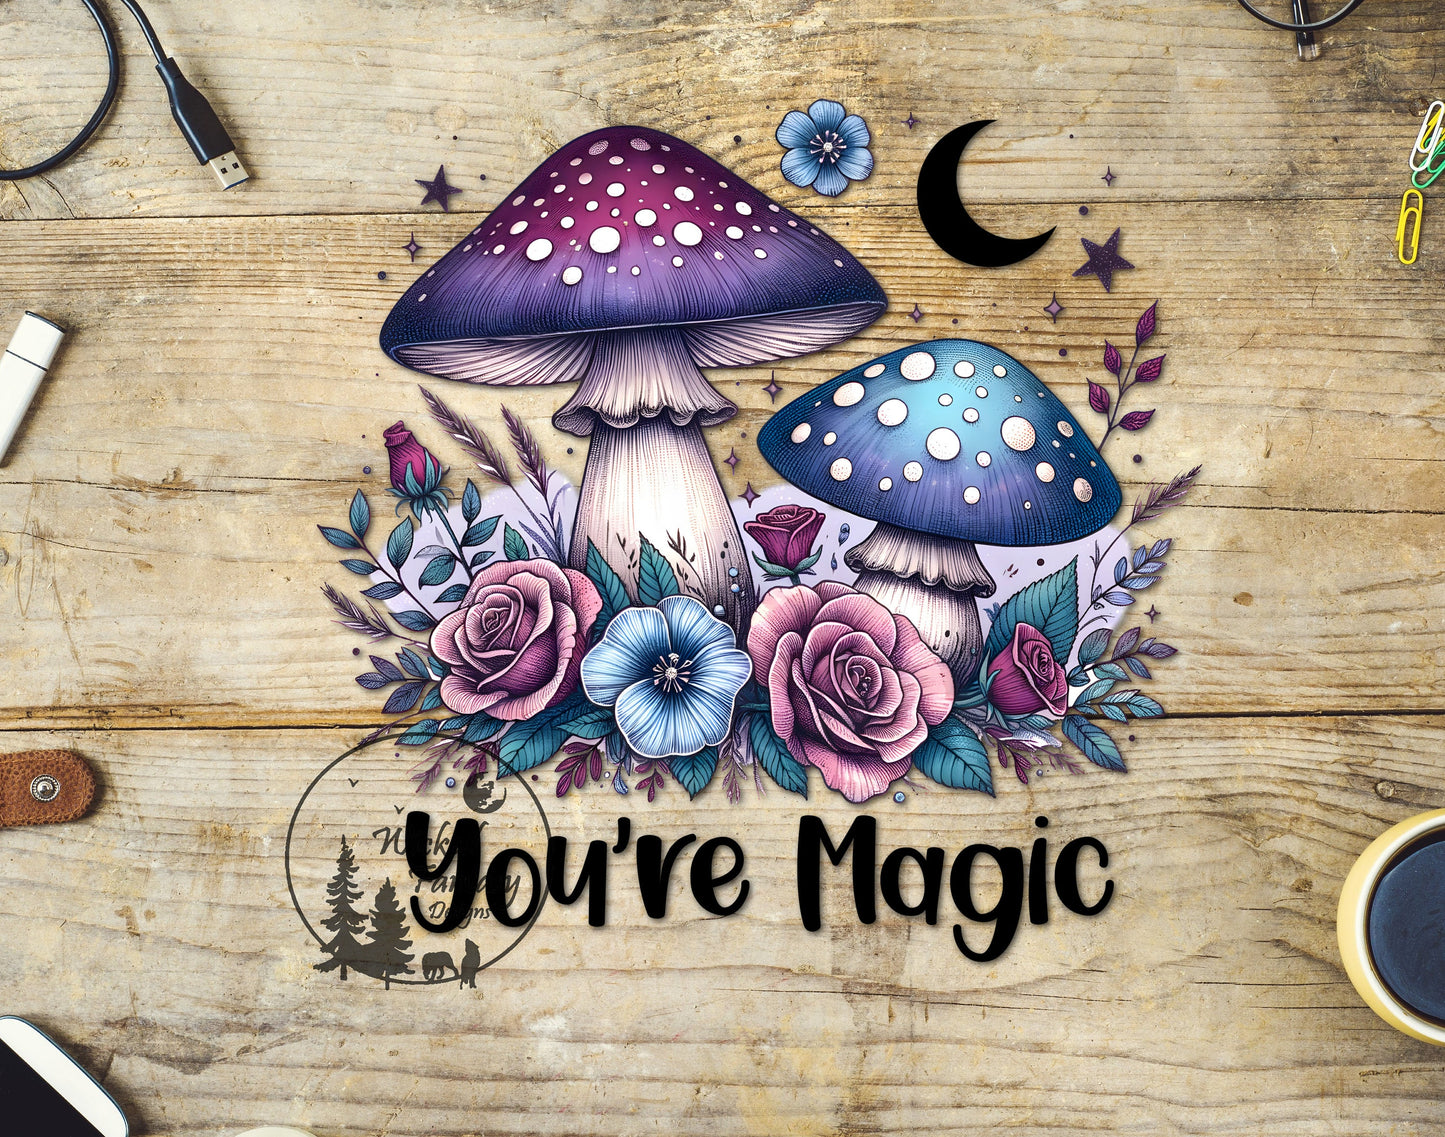 UVDTF Decal You're Magic Mushrooms Crescent Moon Stars Crystals Purple Blue Roses Mystical 1pc